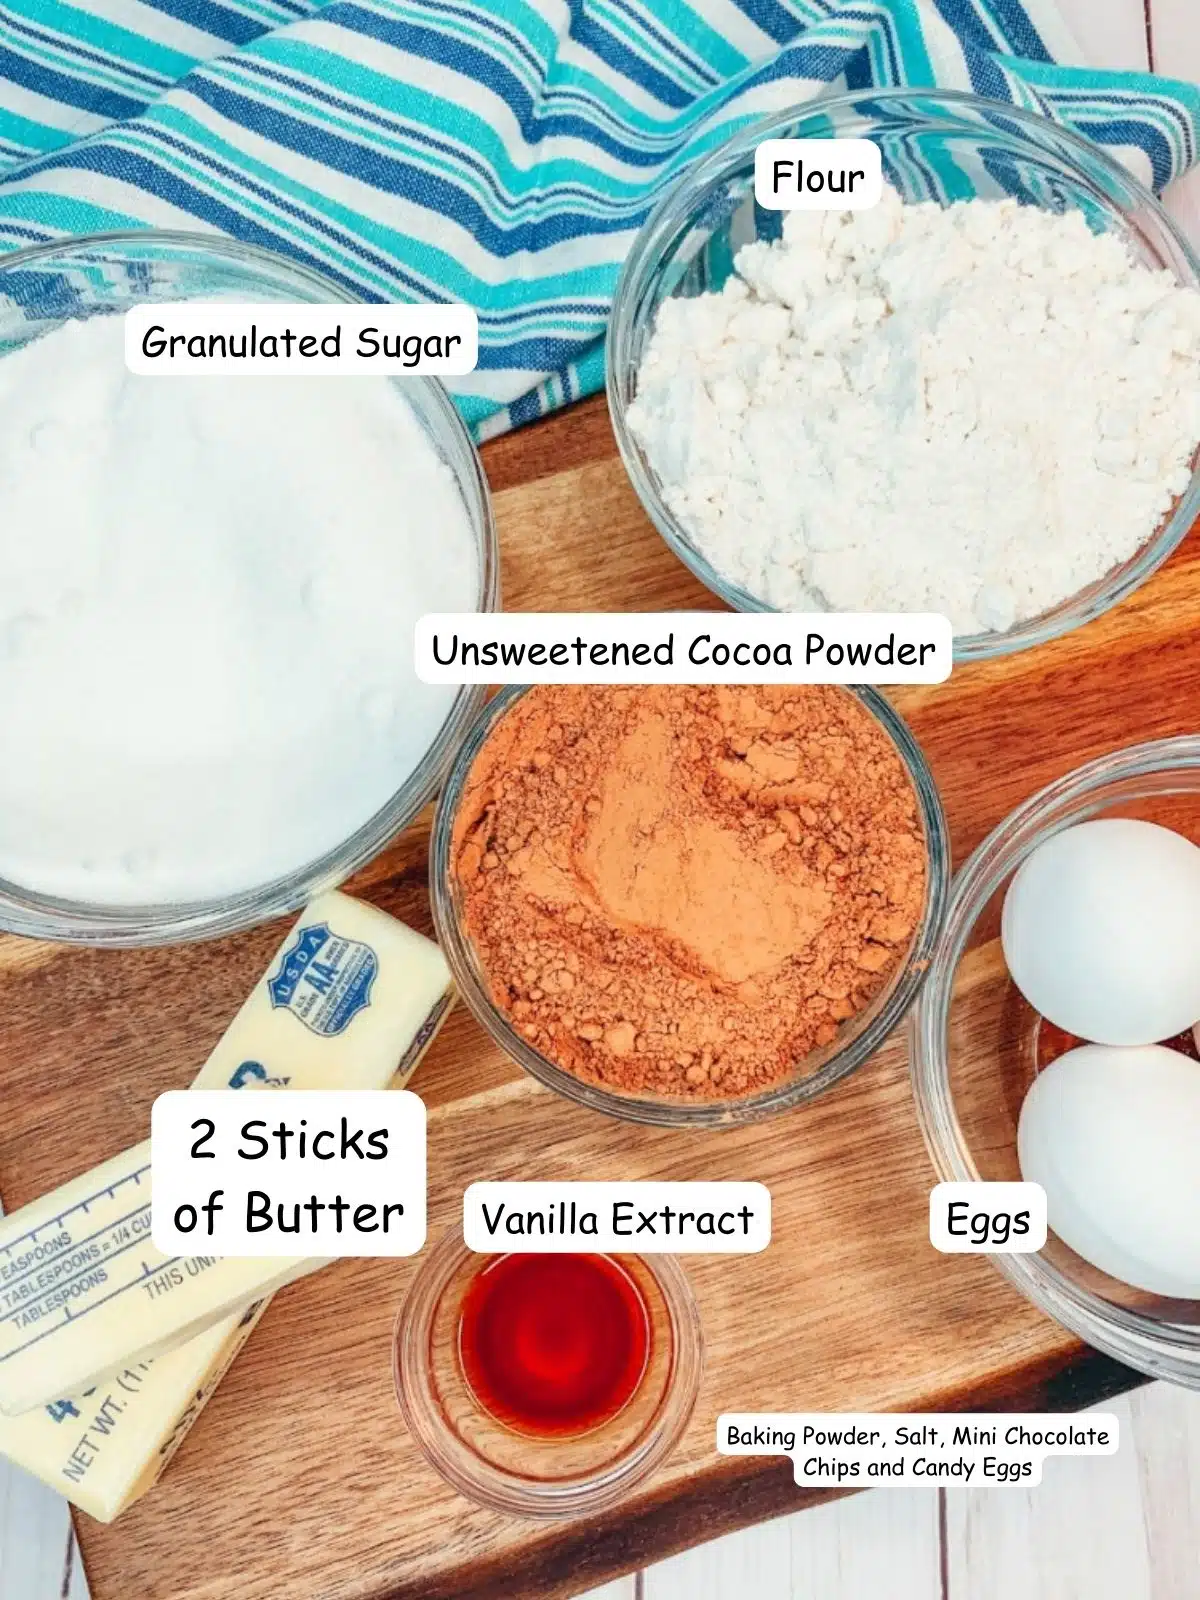 ingredients for homemade brownies for Easter.